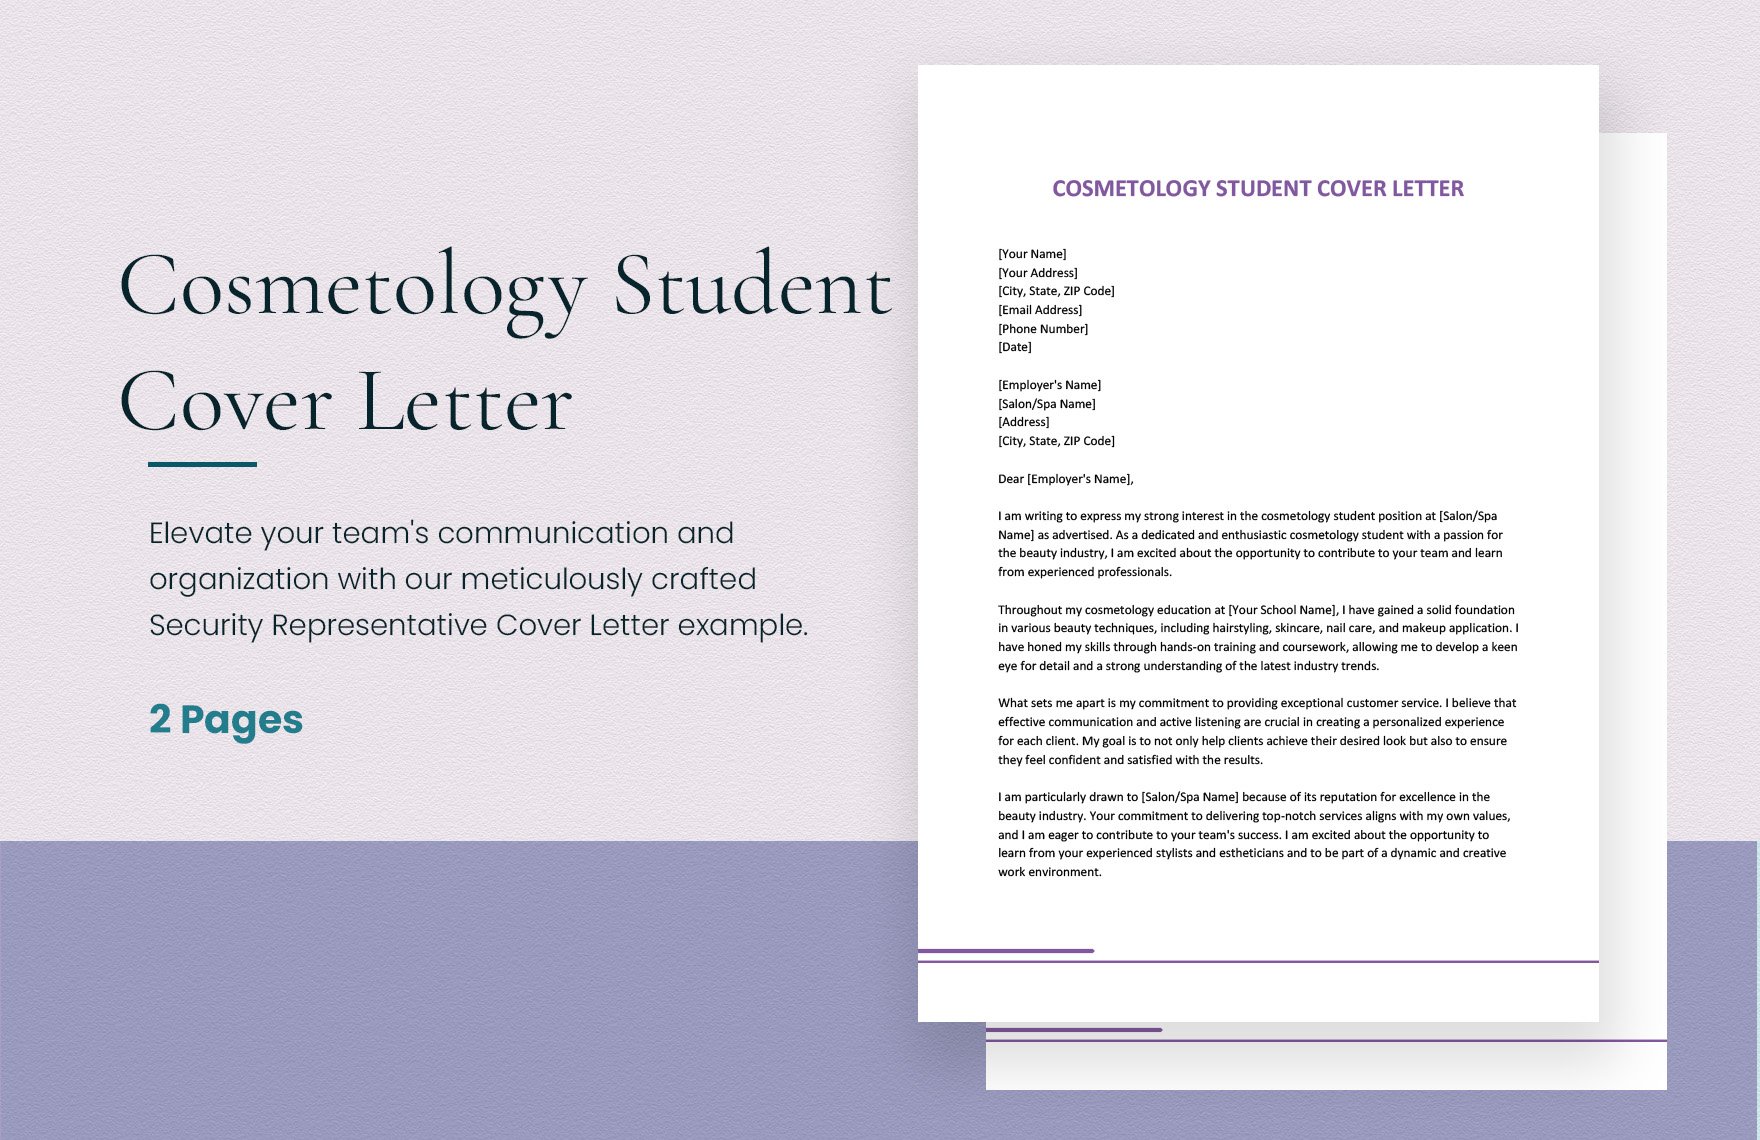 Cosmetology Student Cover Letter